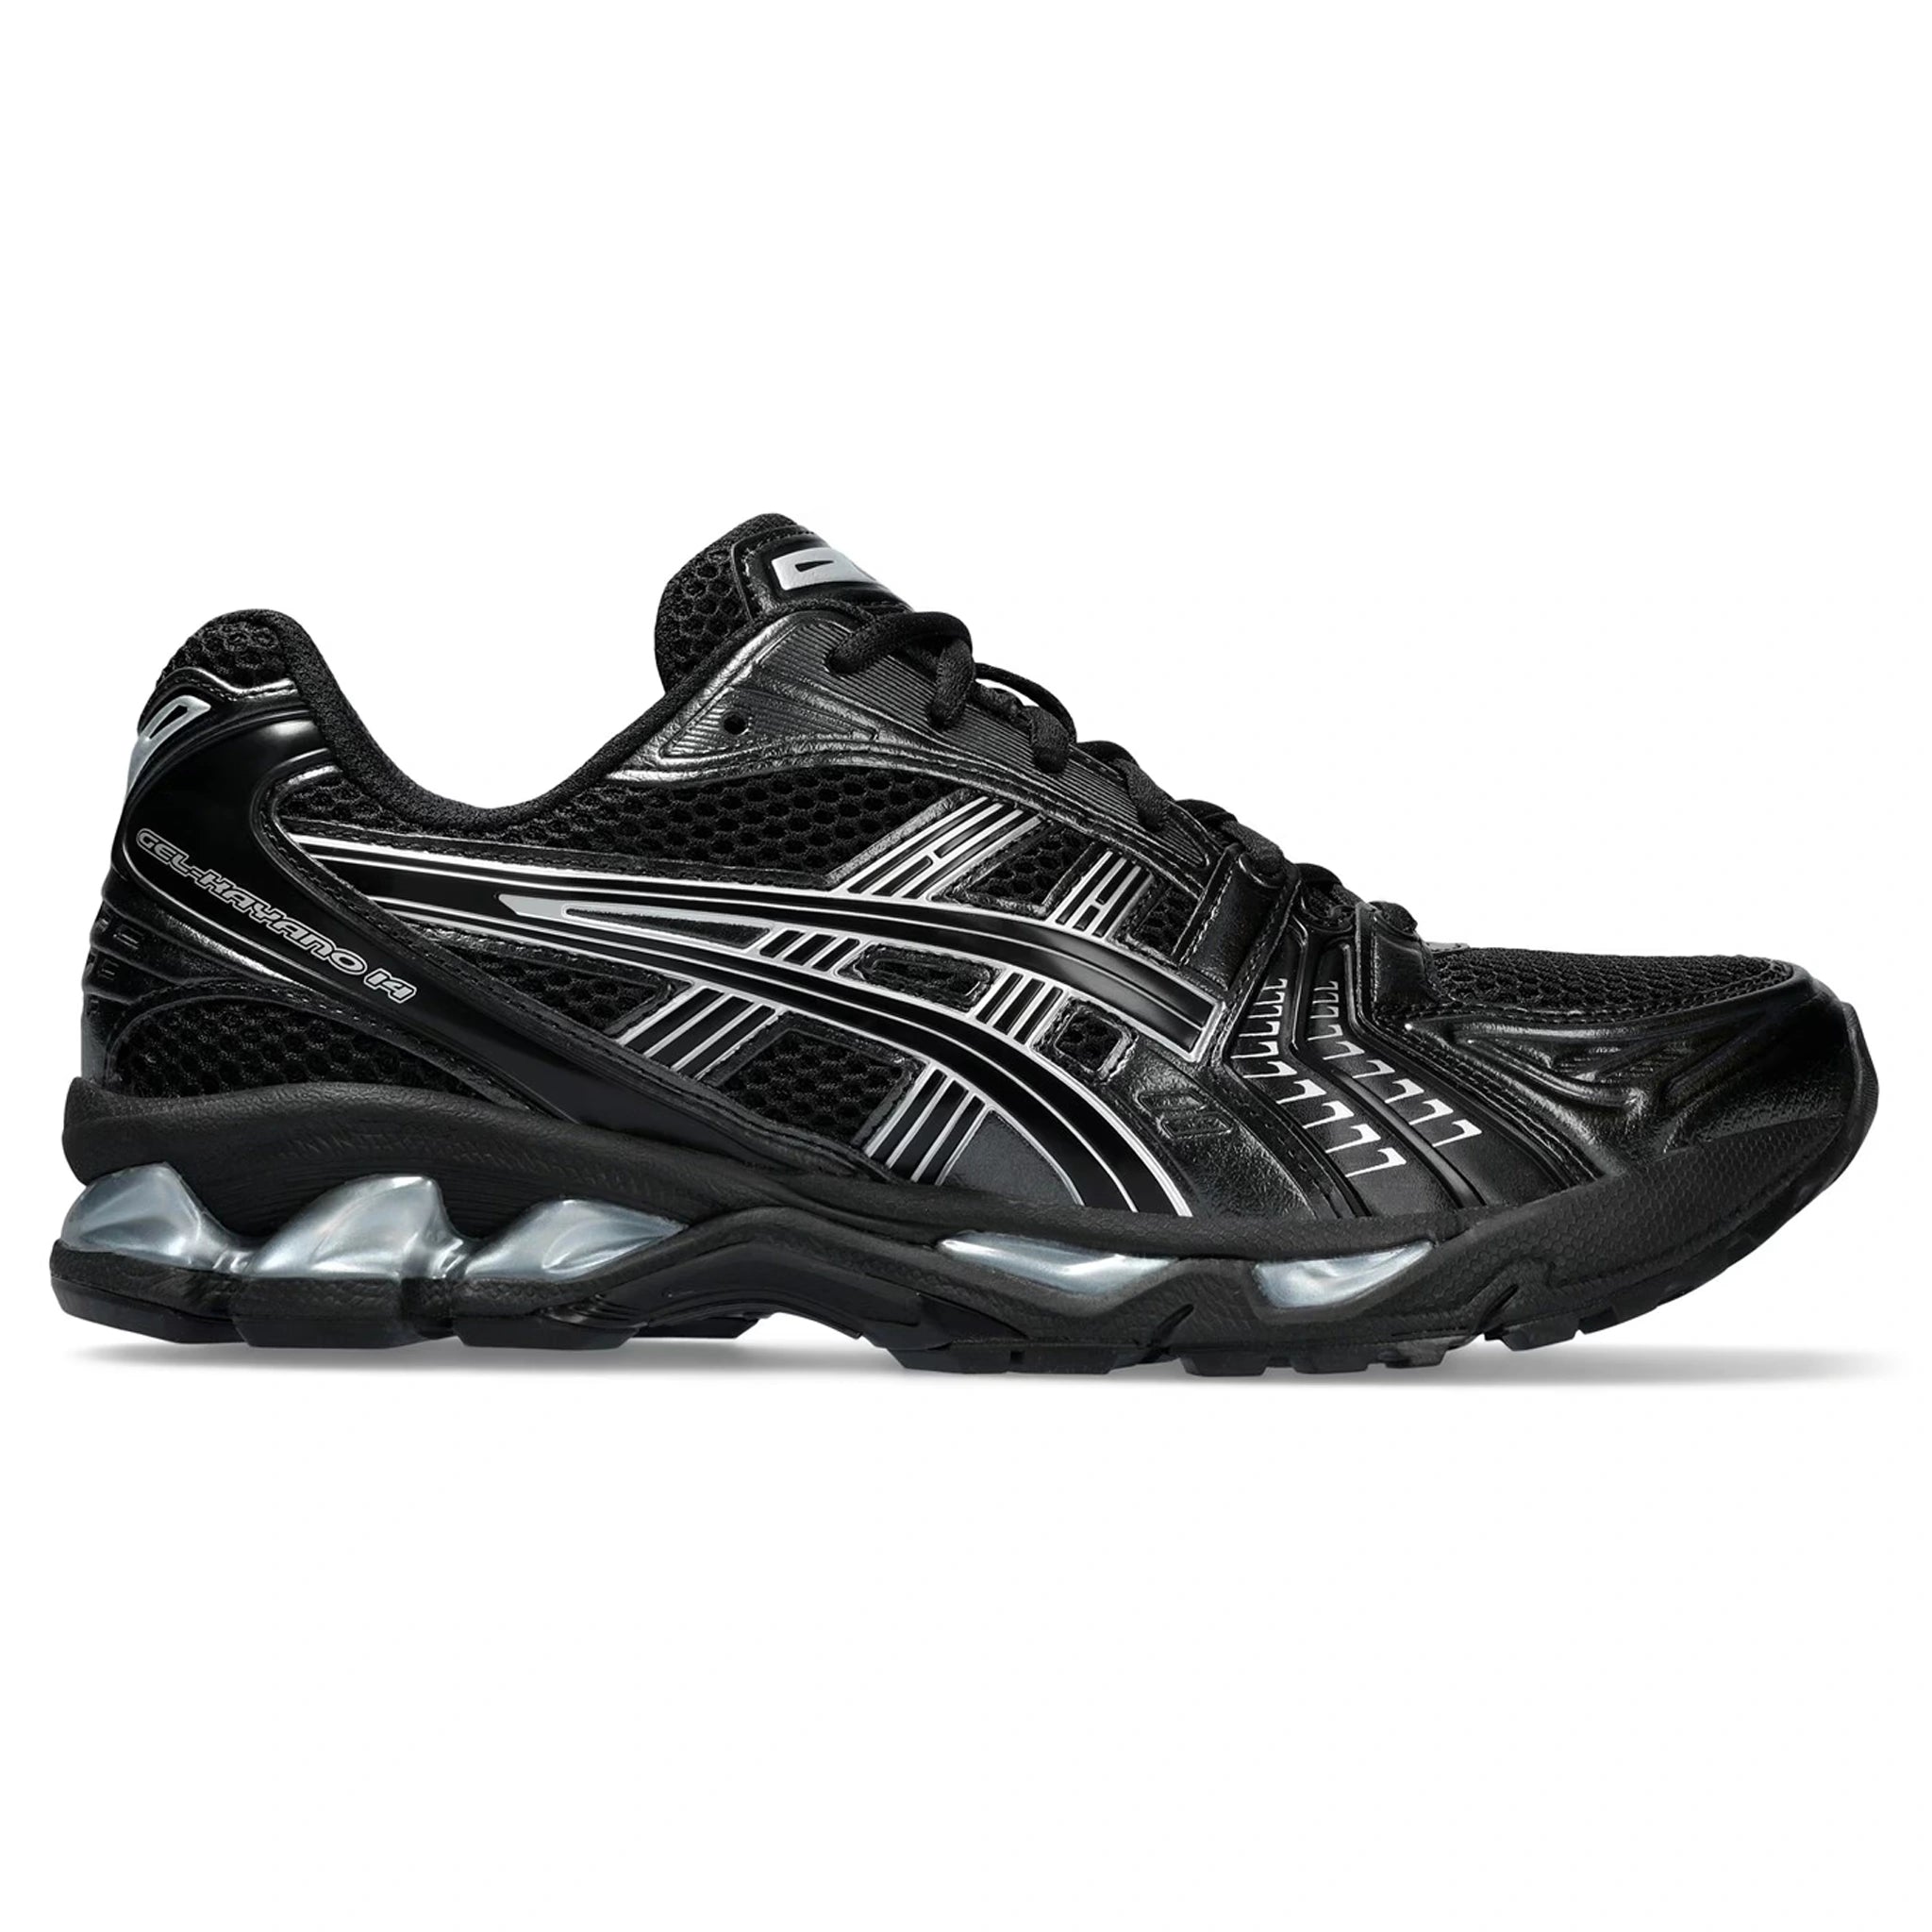 Side view of ASICS Gel-Kayano 14 Black Silver 1201A019-006